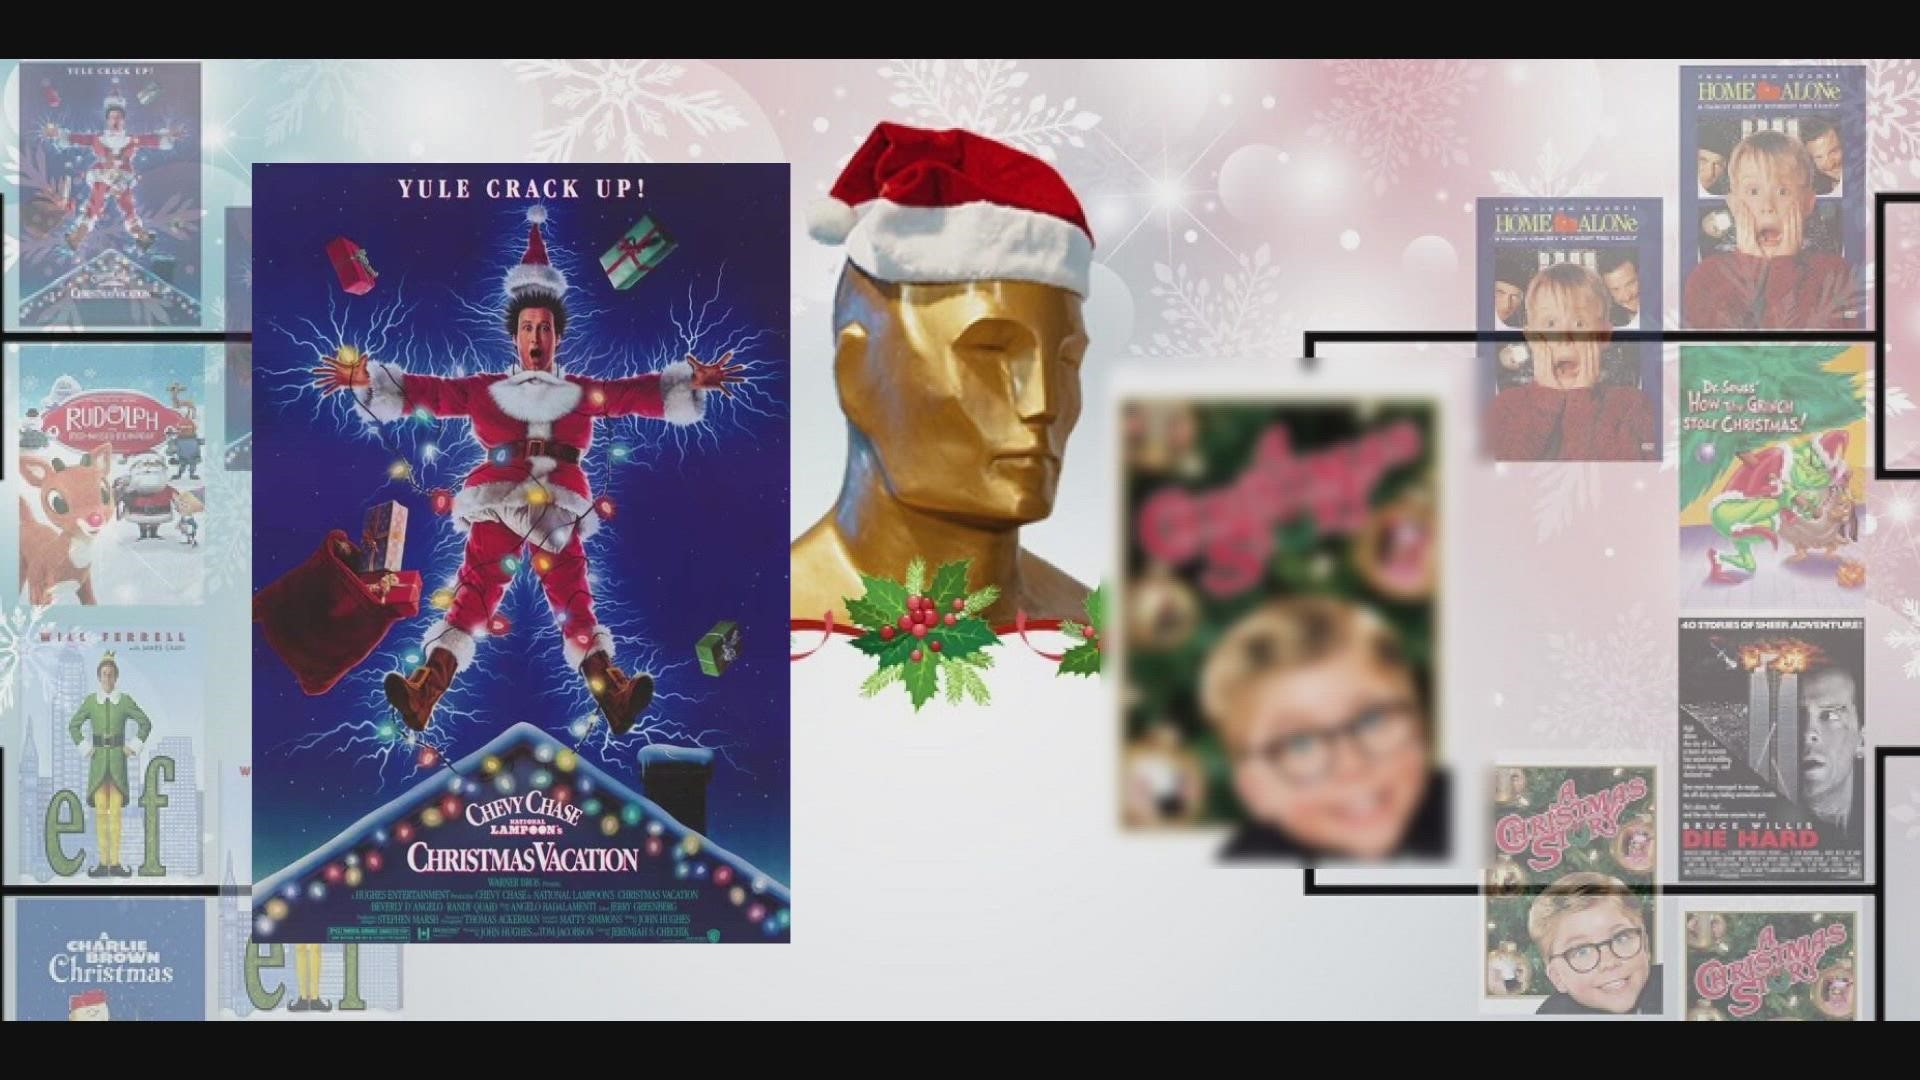 The 9NEWS audience has once again helped us determine the best Christmas movie in the 5th annual Christmas flick fight.